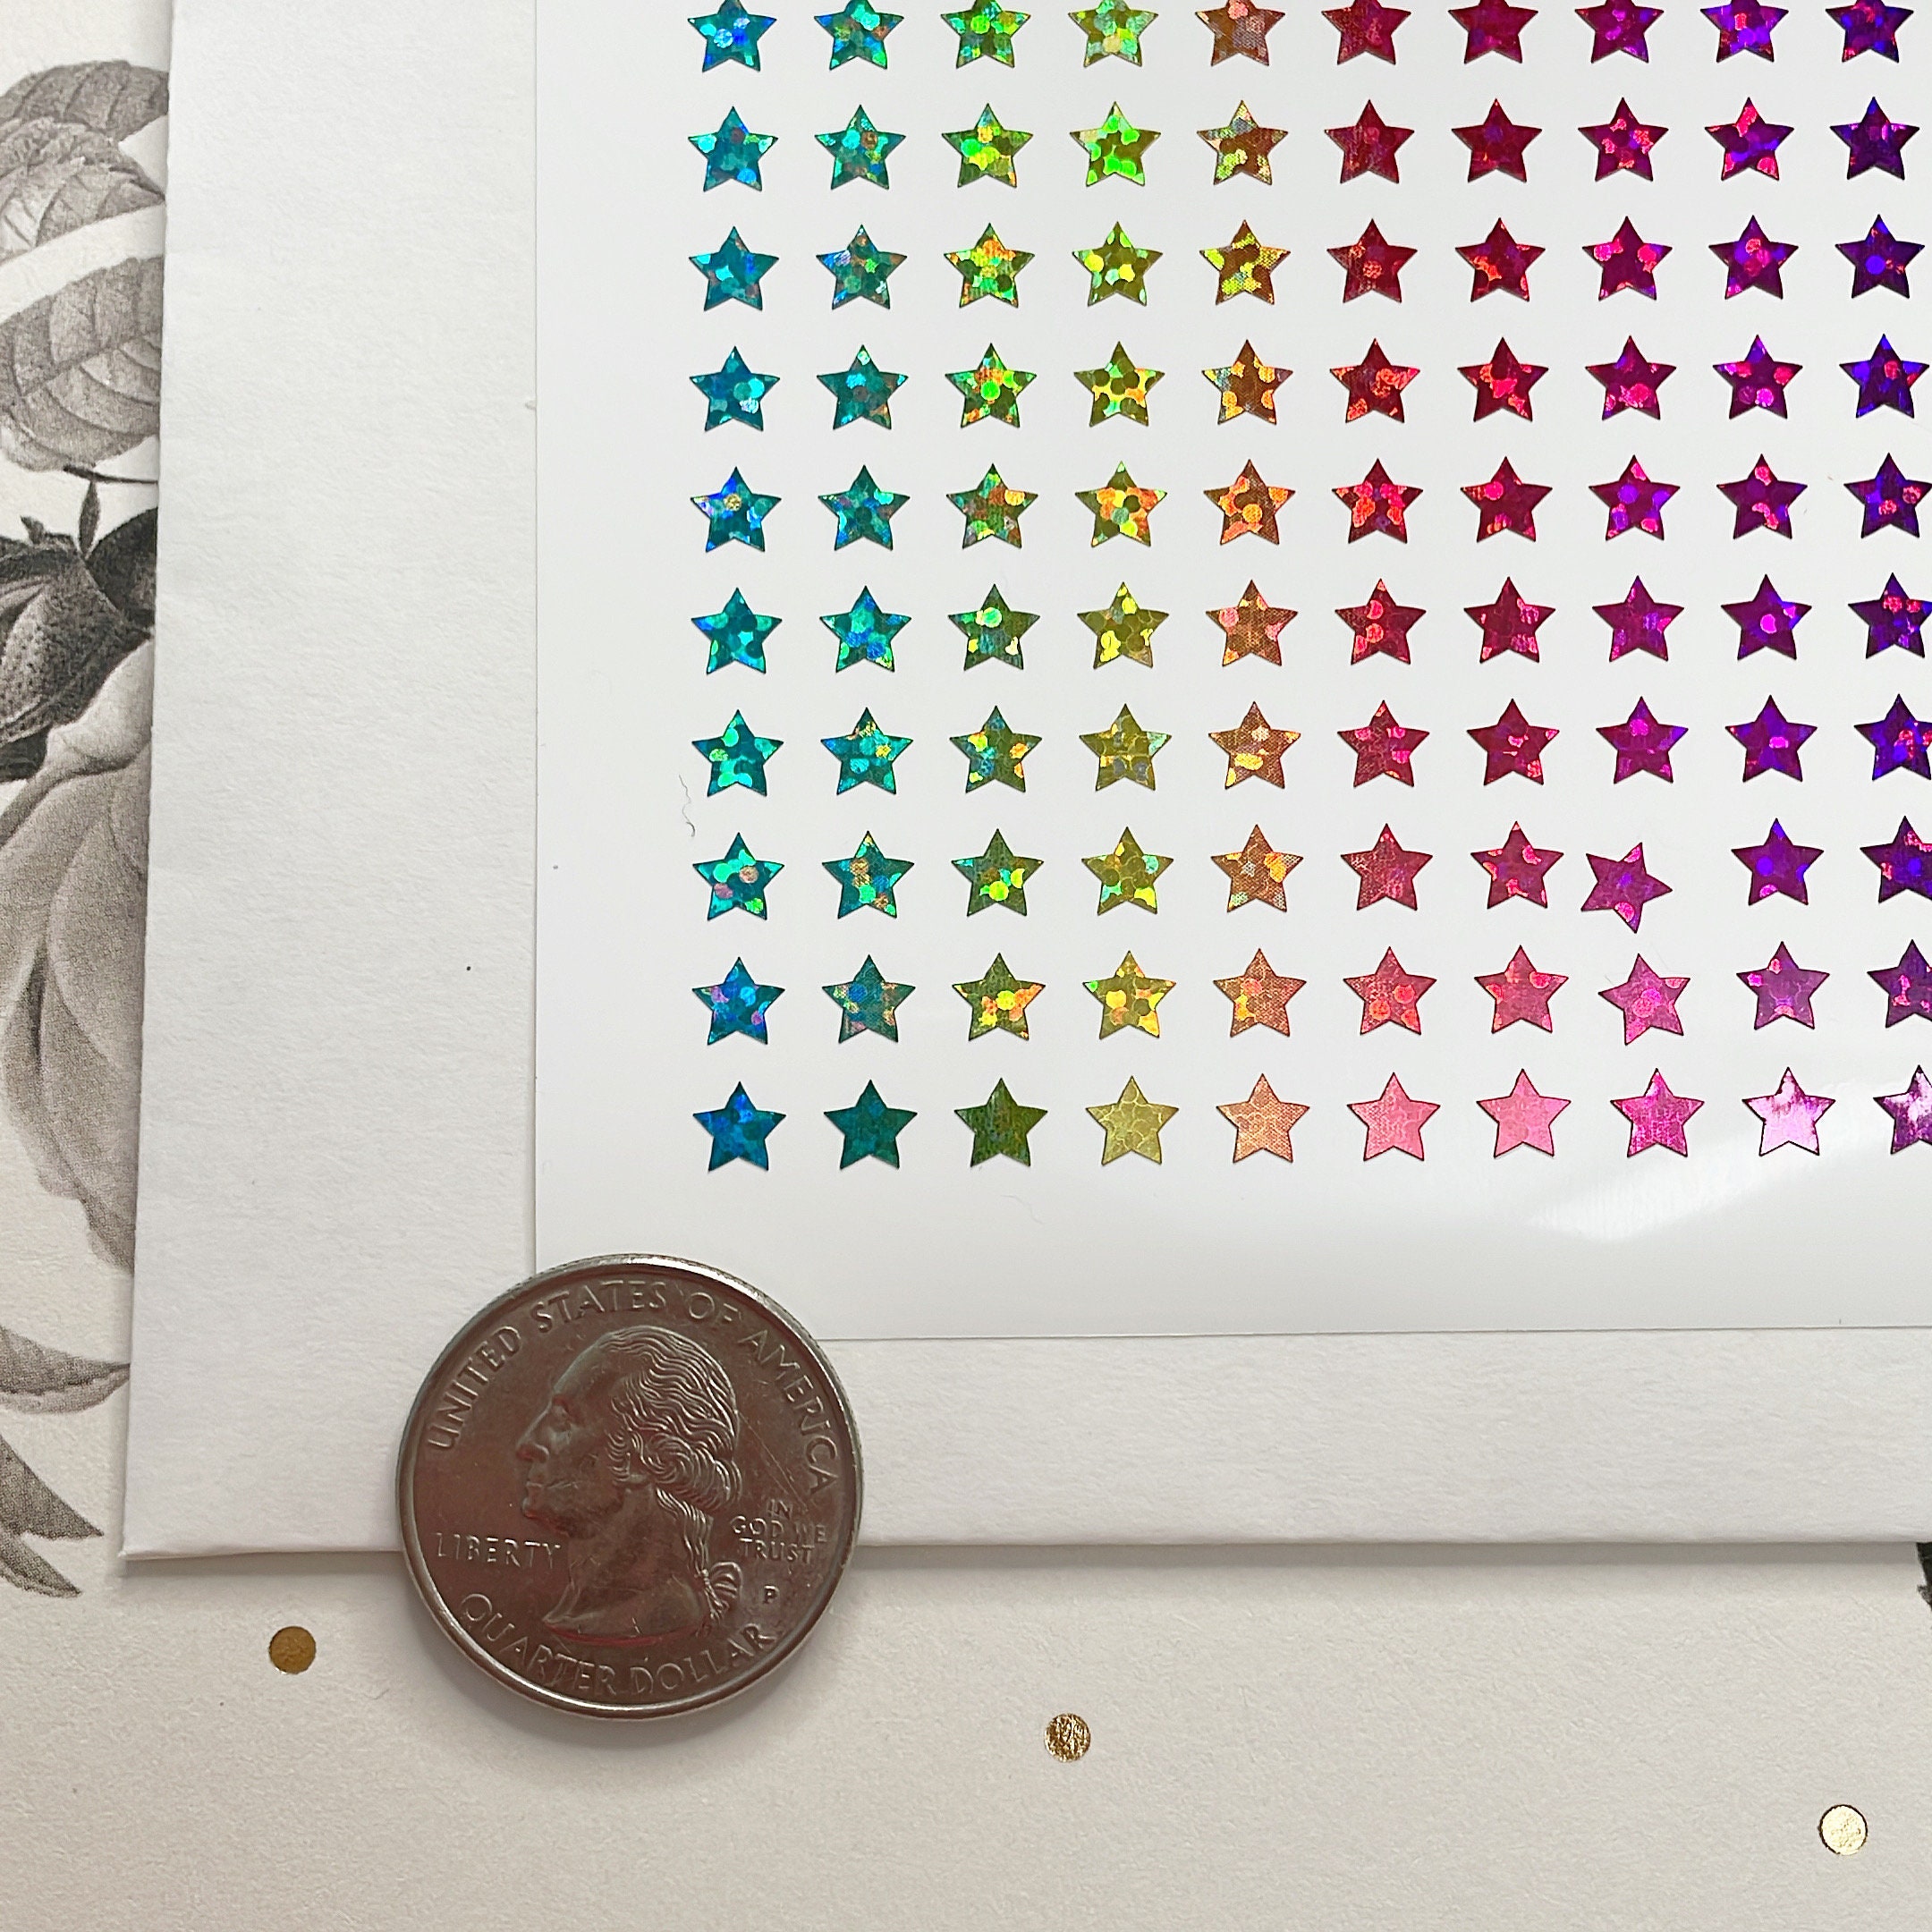 Vinyl 8mm Iridescent Star Stickers, Tiny Holographic Star Stickers